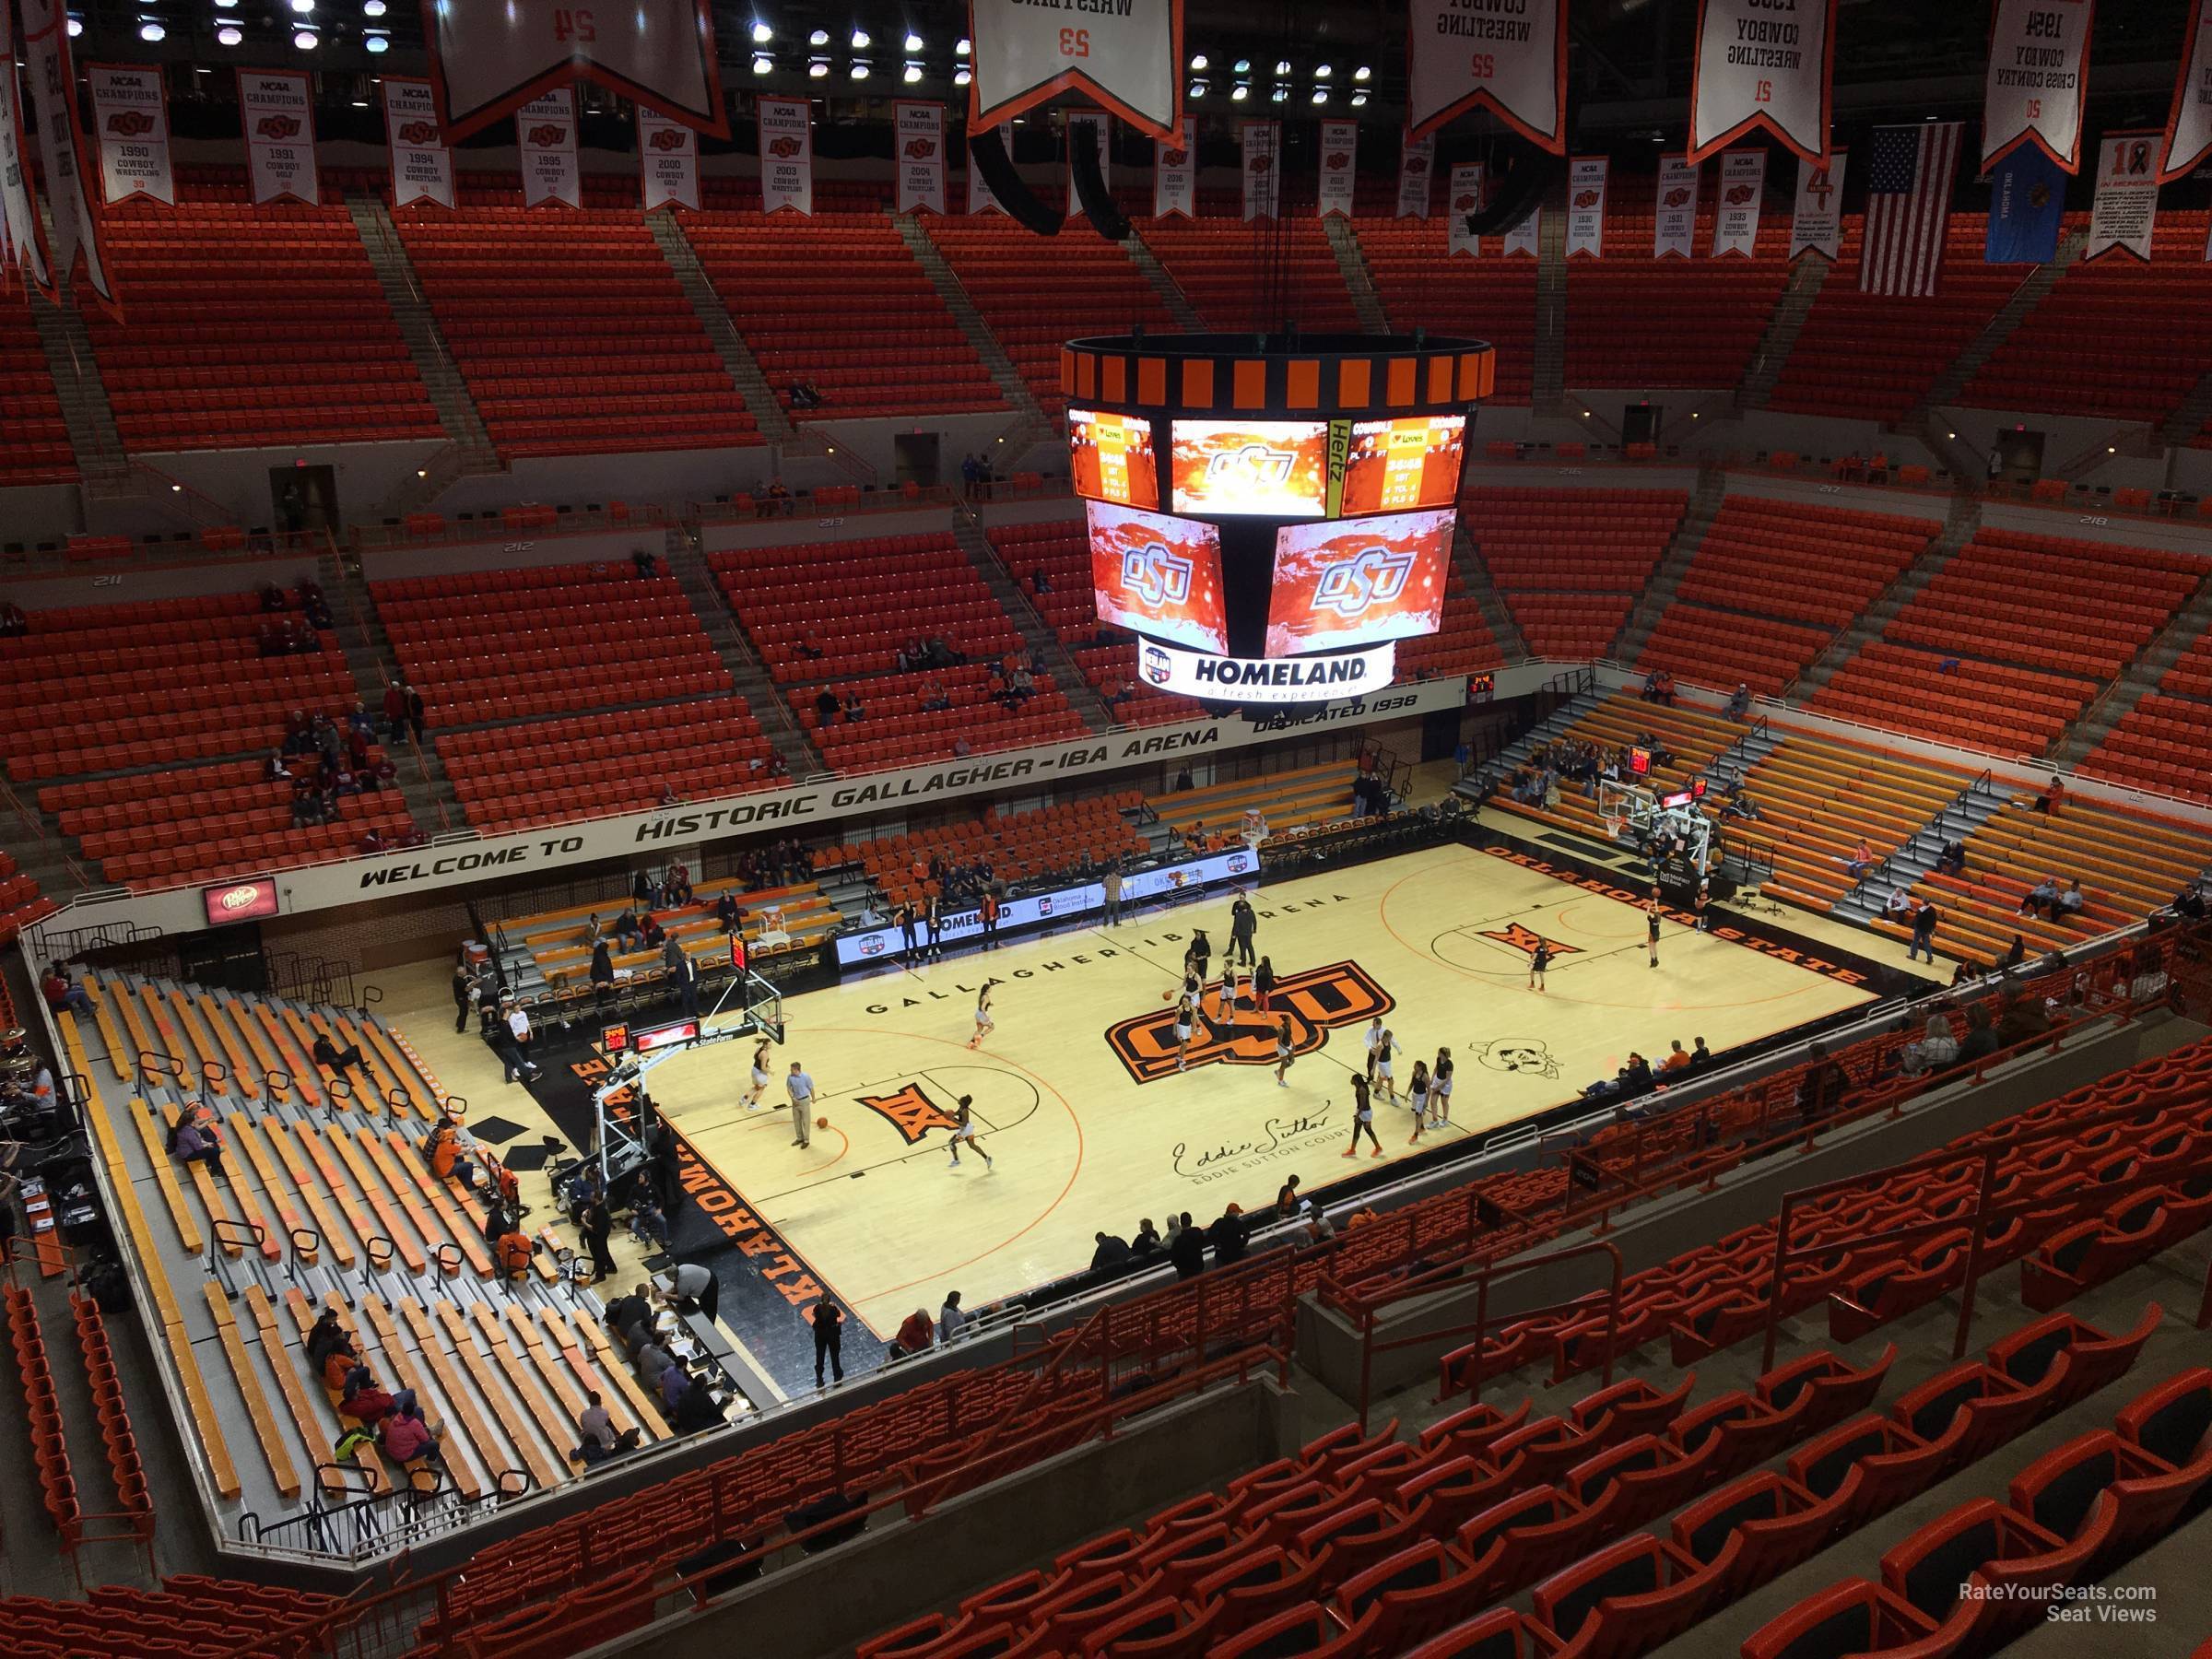 section 306, row 10 seat view  - gallagher-iba arena